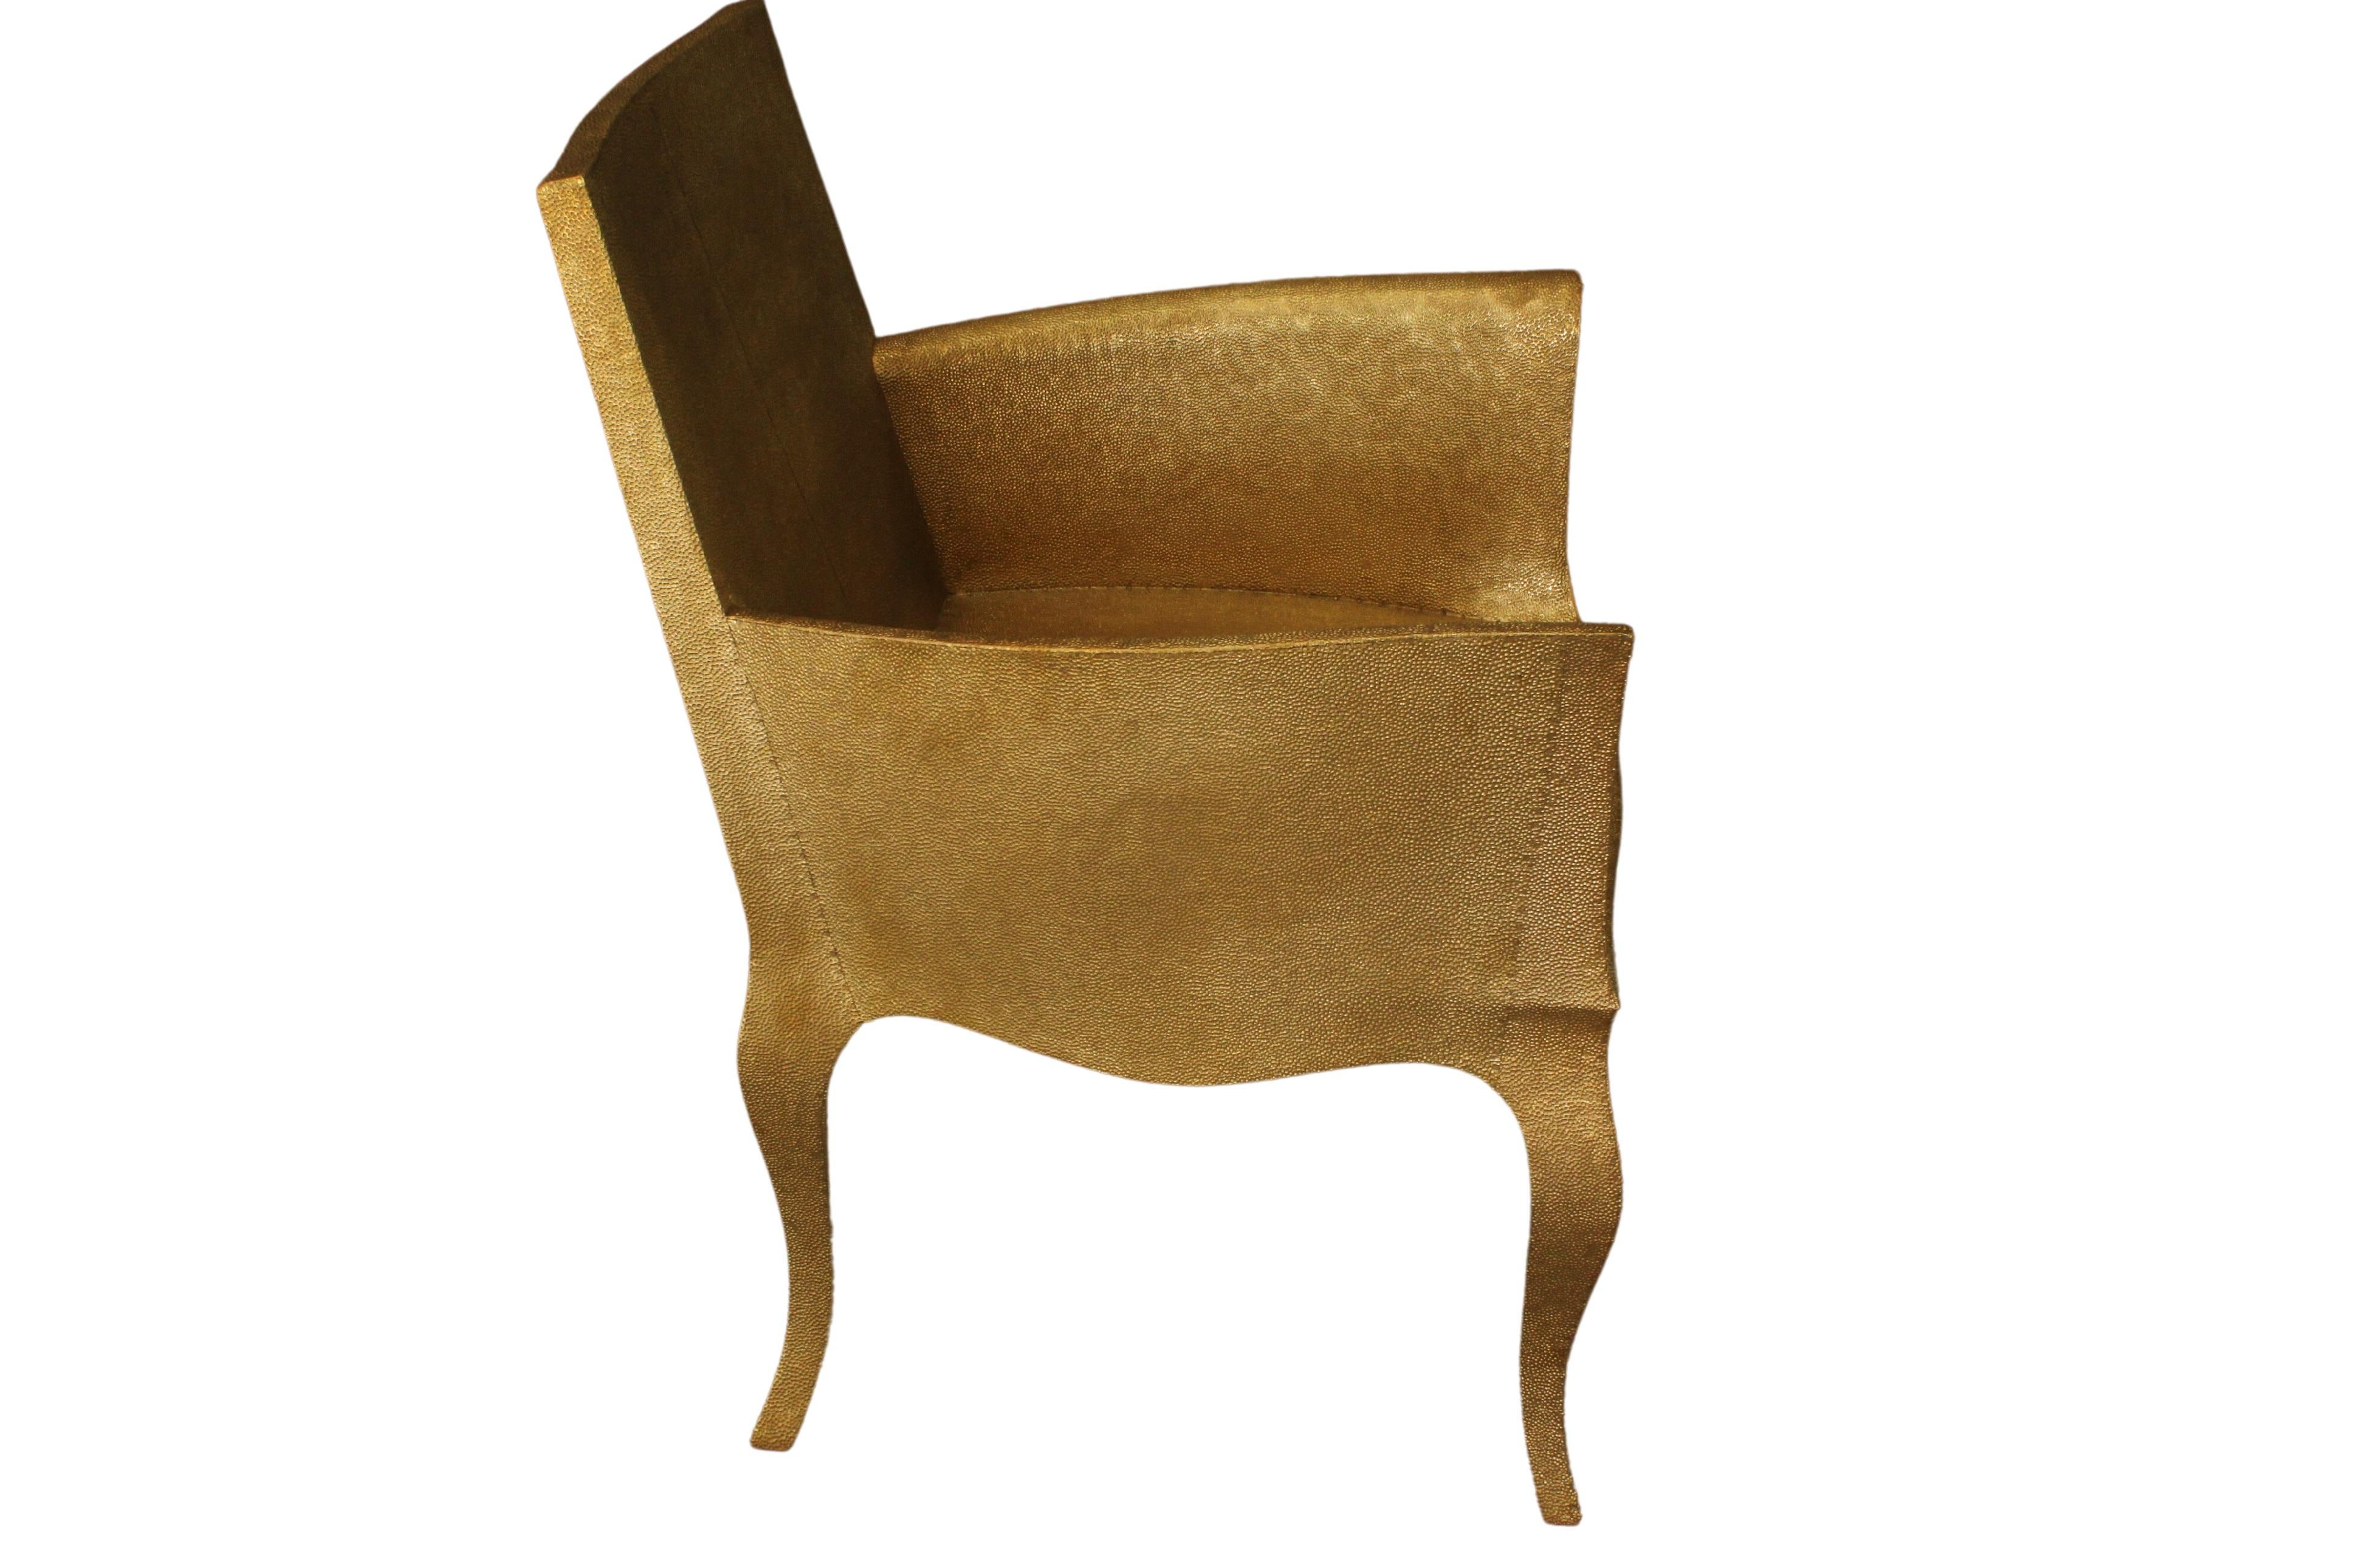 Metal Art Deco Desk Chair Mid Hammered in Brass by Paul Mathieu For Sale